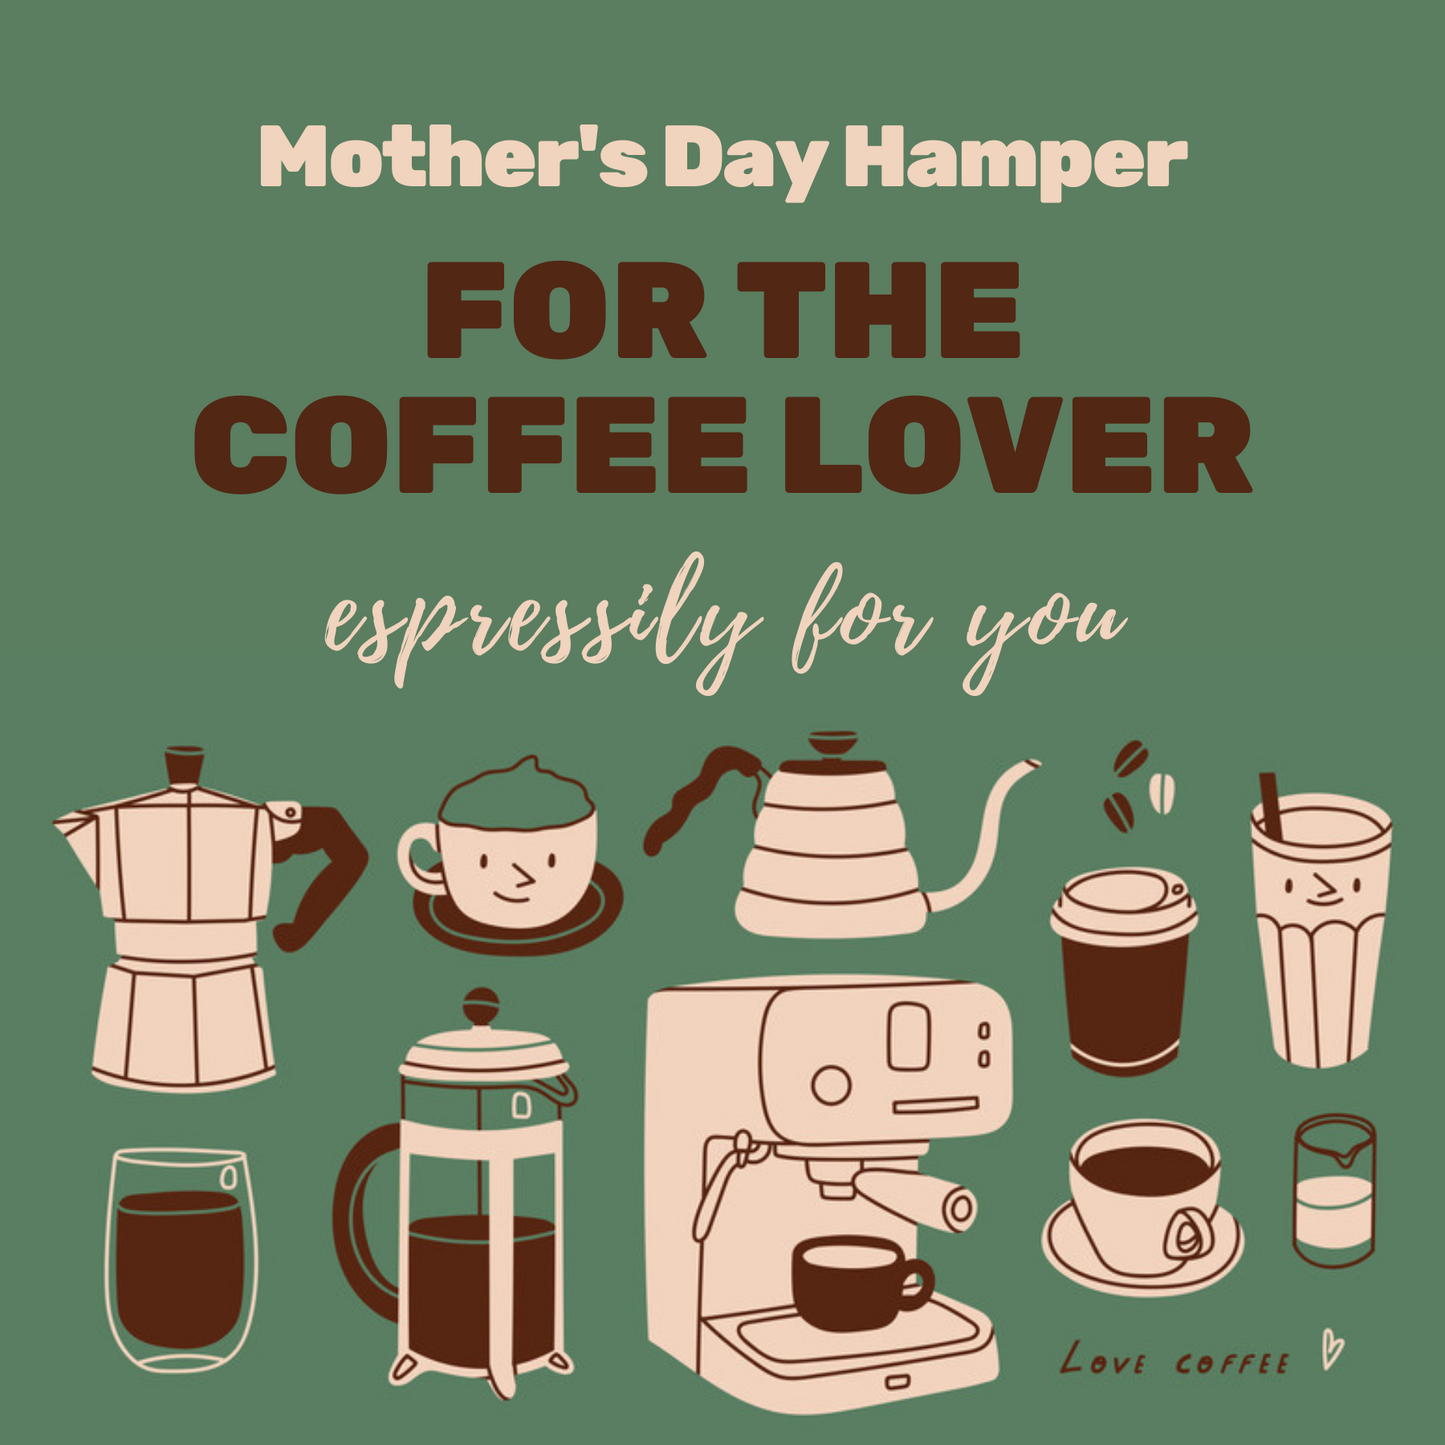 Mother's Day Hamper For the Coffee Lover